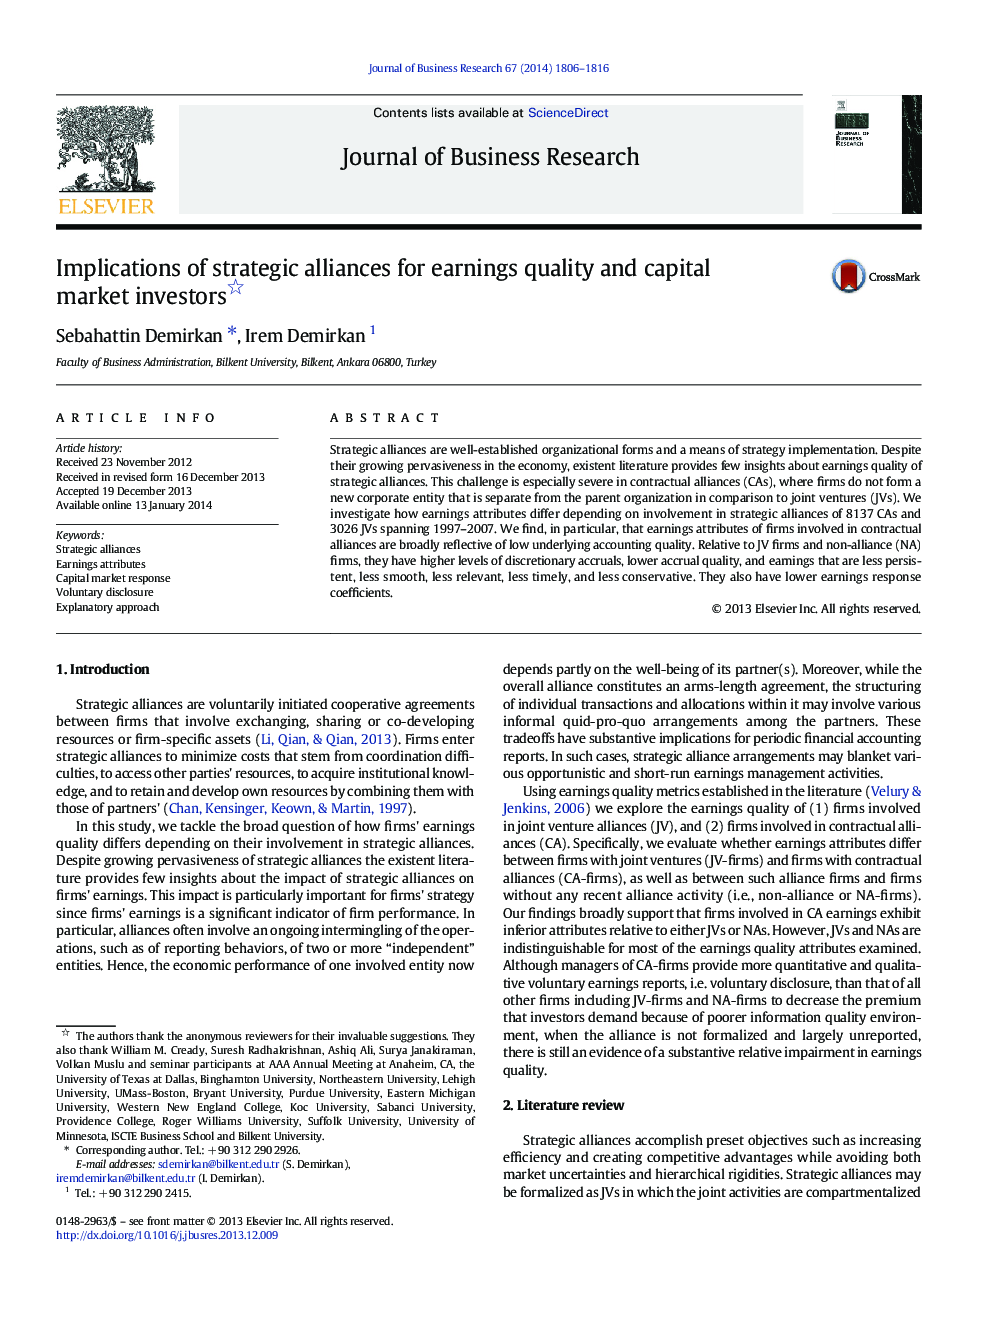 Implications of strategic alliances for earnings quality and capital market investors 